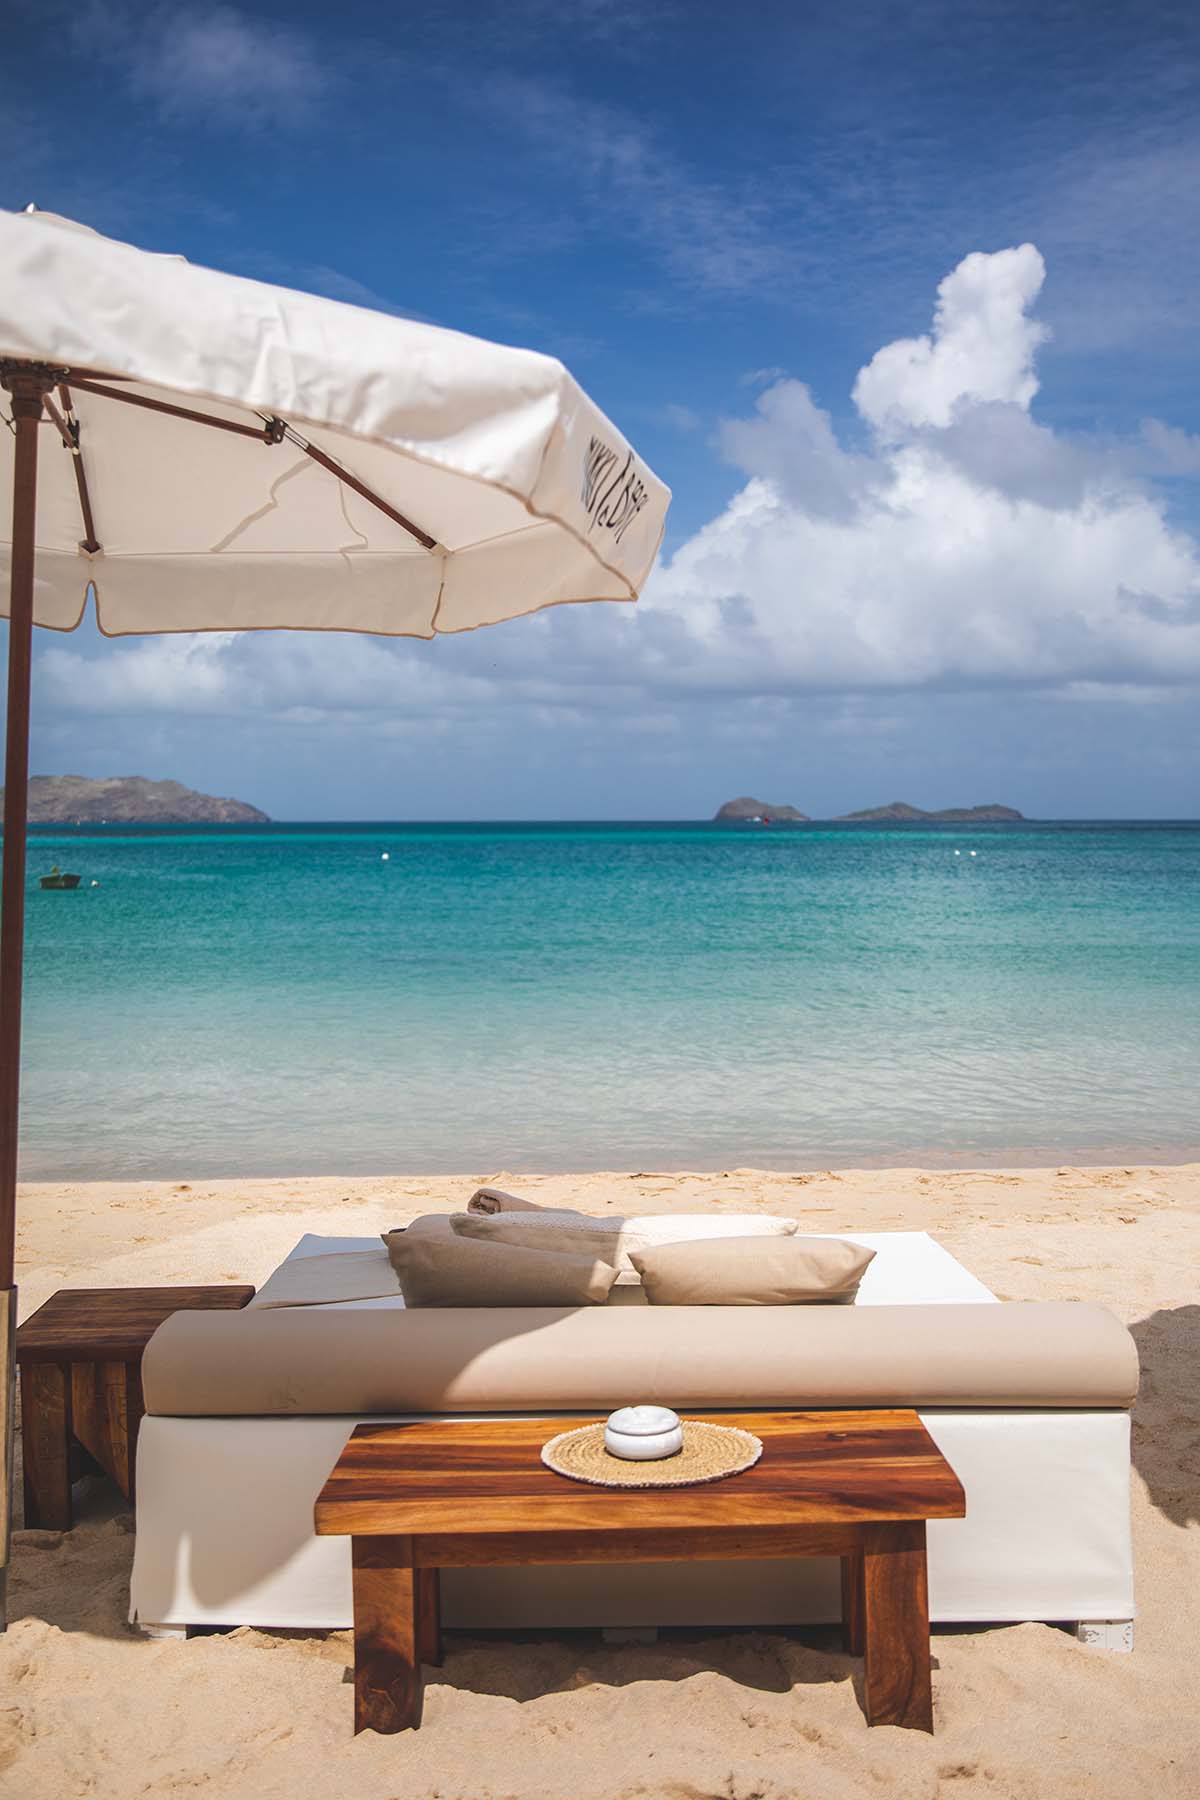 A DJ's Secret Guide to St. Barth: The Luxury Hotels, Crazy Dance Spots and  Hidden Beaches of the Party Island